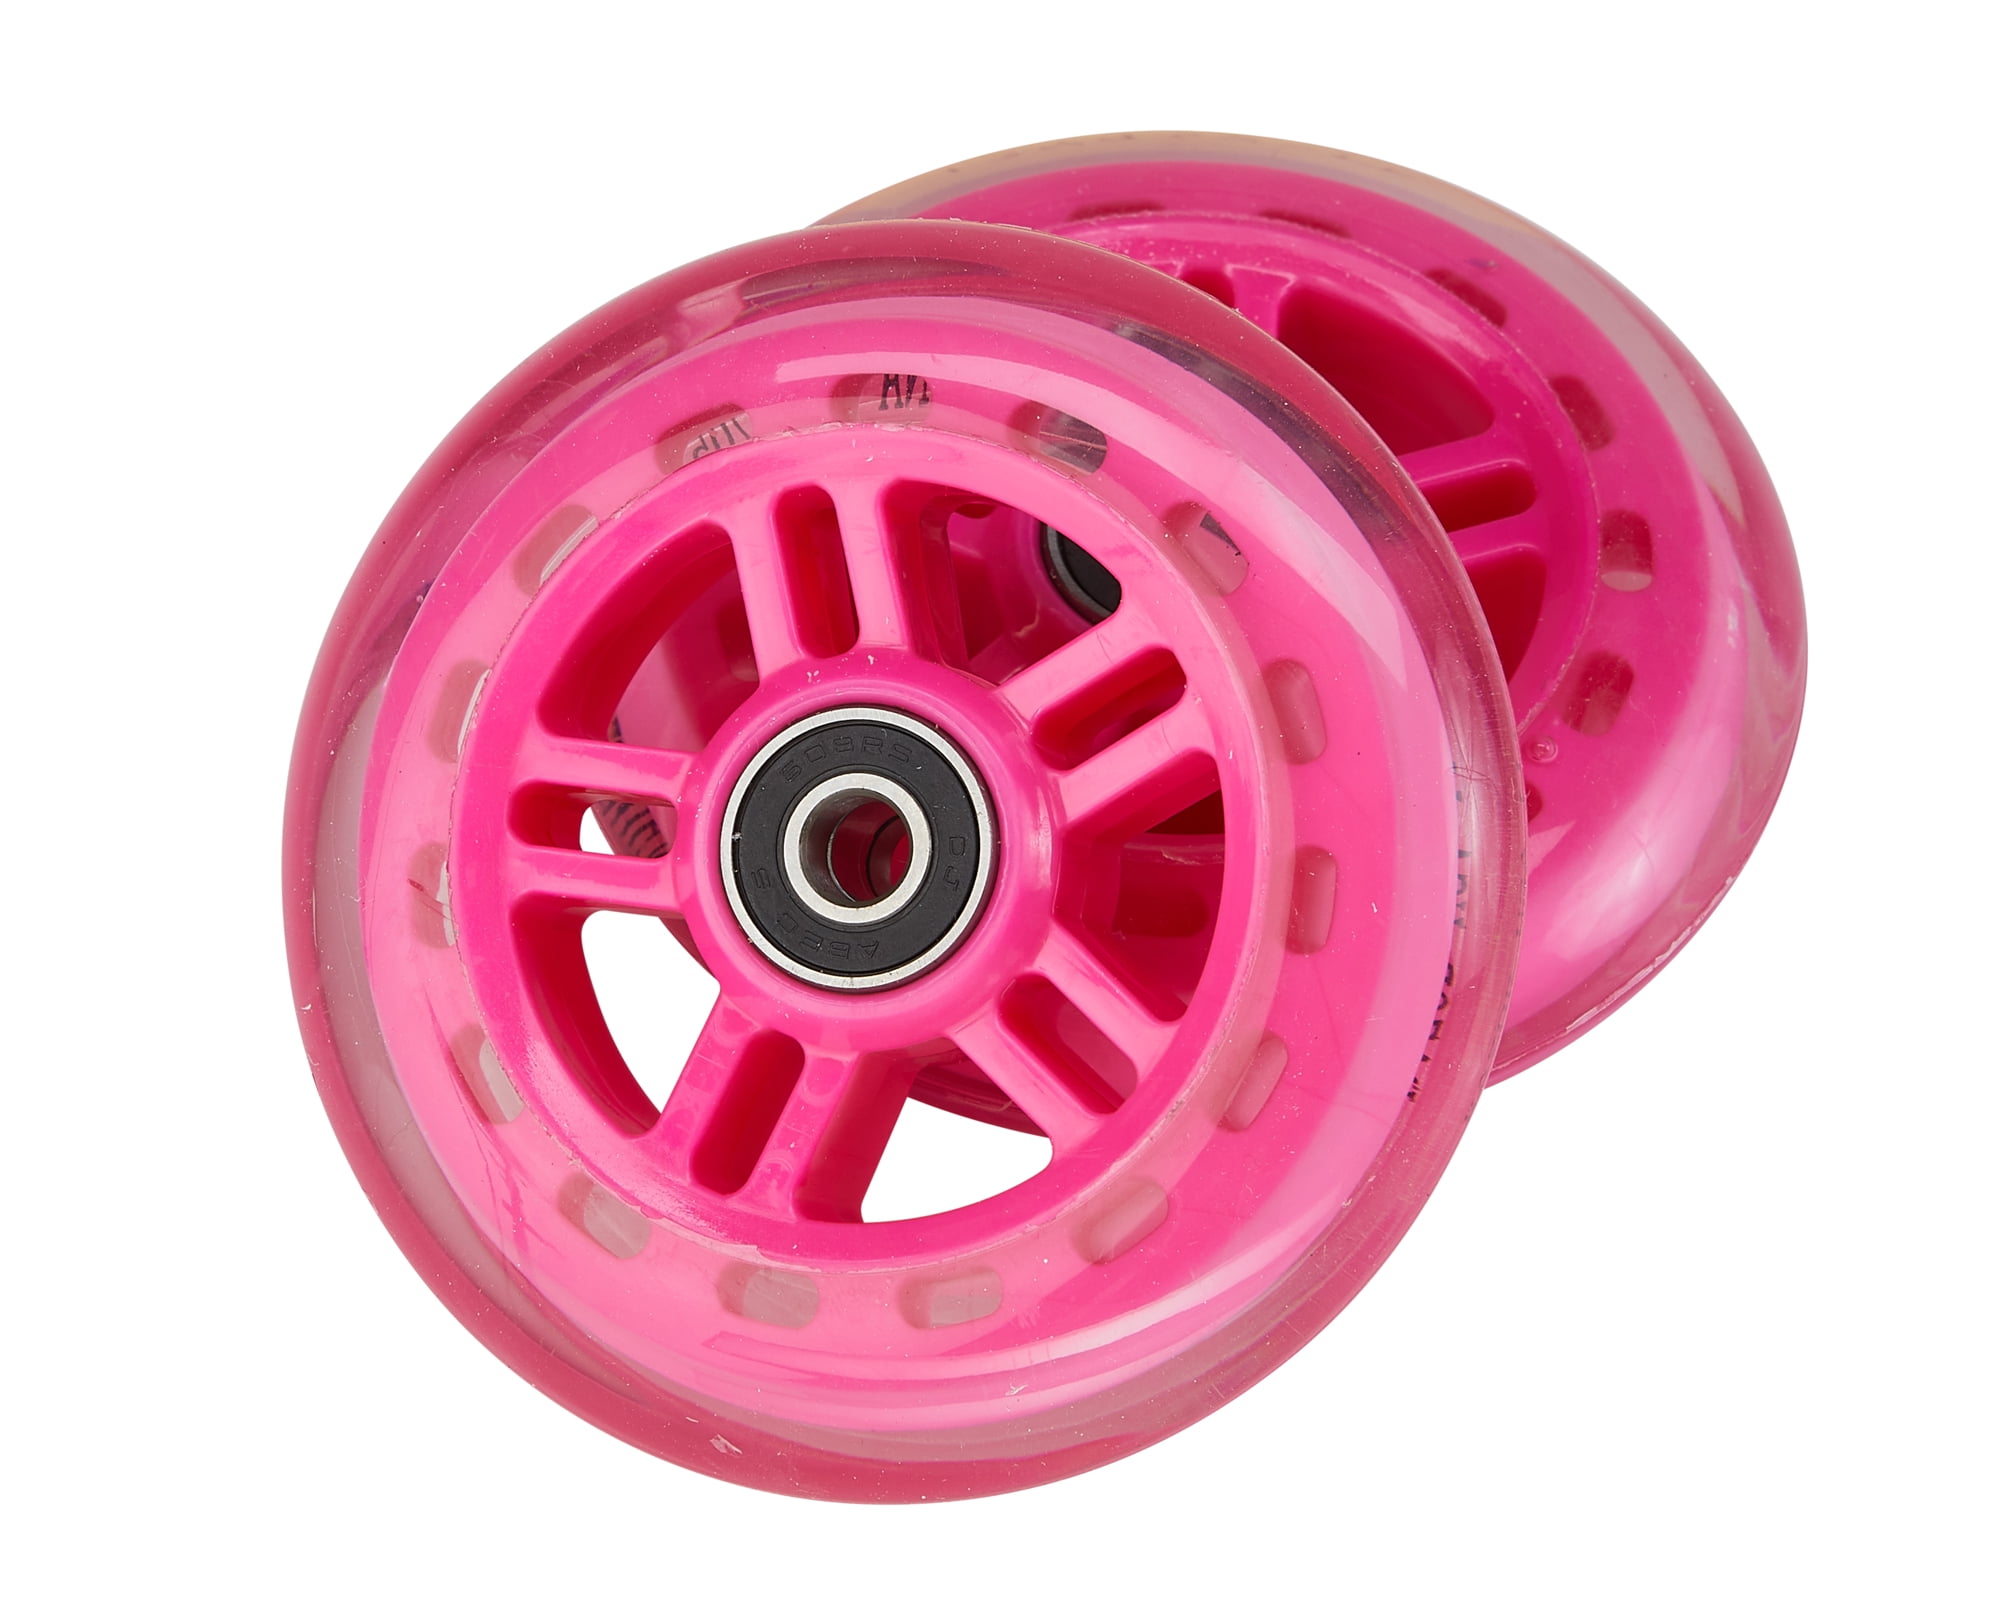 Scooter Wheels Pair Clear Razor Fast "GO" WHEELS 100MM 78A 